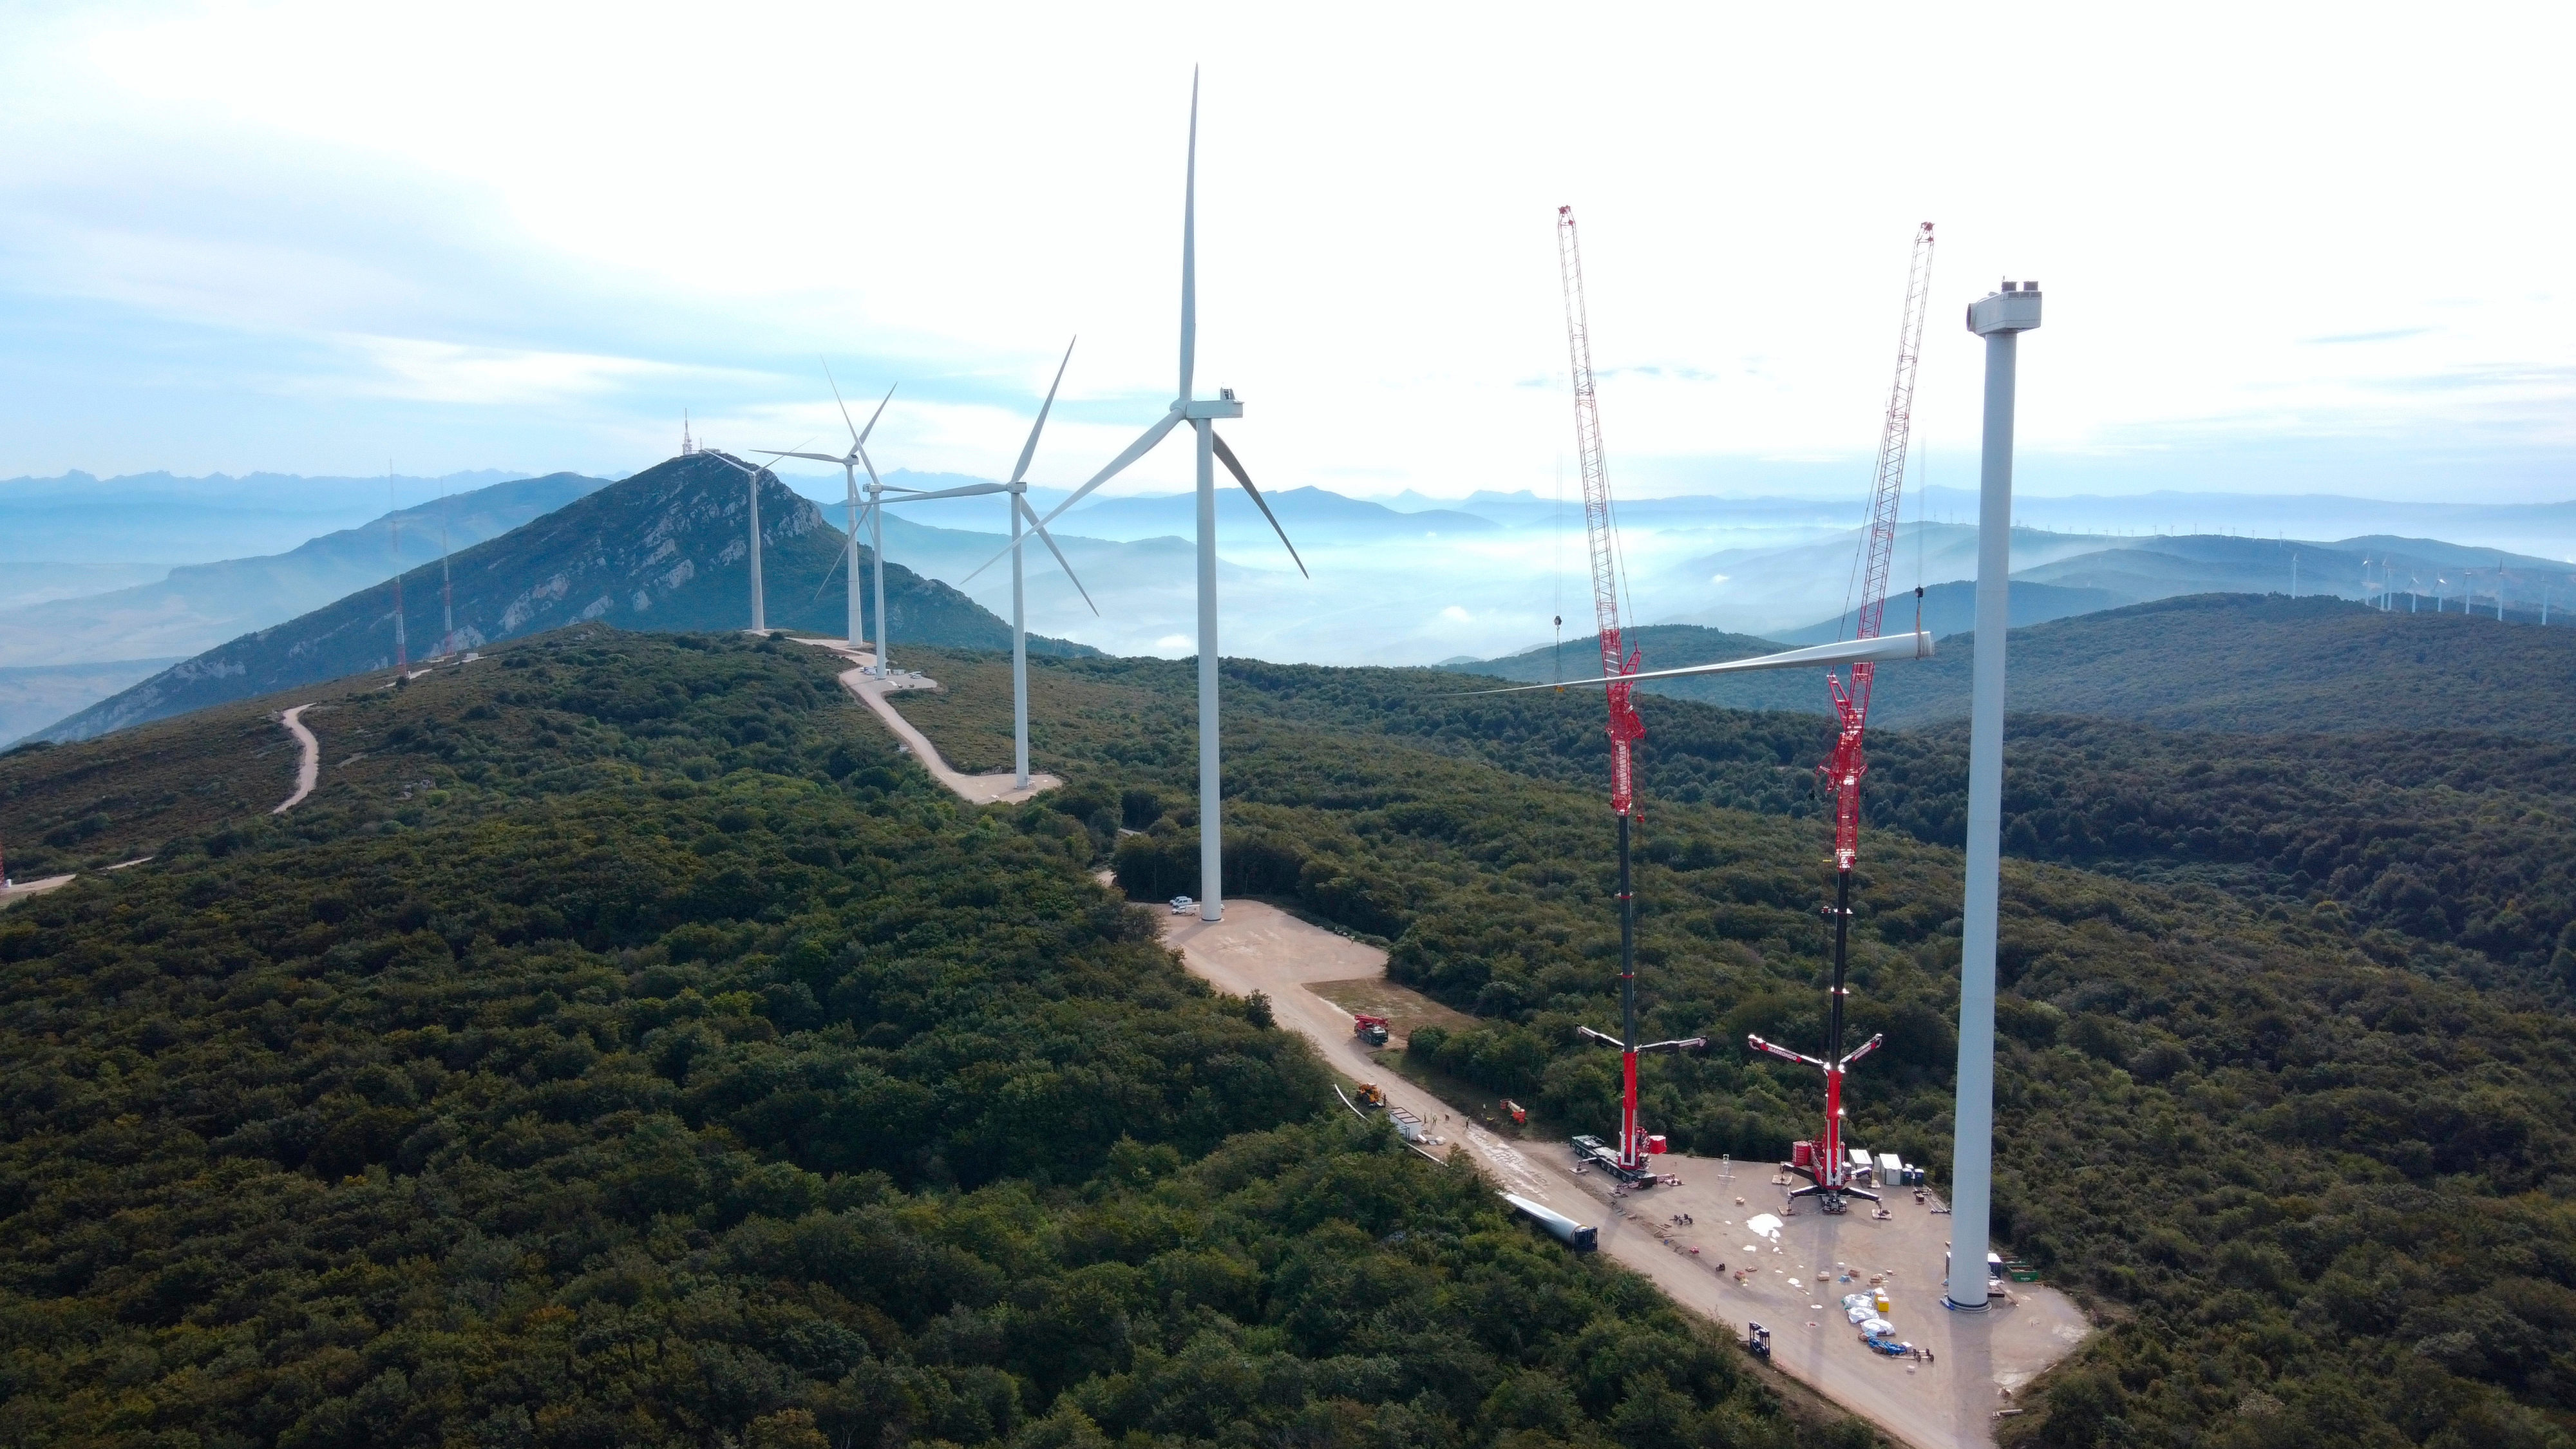 Two Liebherr mobile cranes, an LTM 1750-9.1 and an LTM 1650.8.1 from Grúas Ibarrondo replacing three rotor blades on a wind turbine at the Cener-Alaiz experimental offshore wind farm.